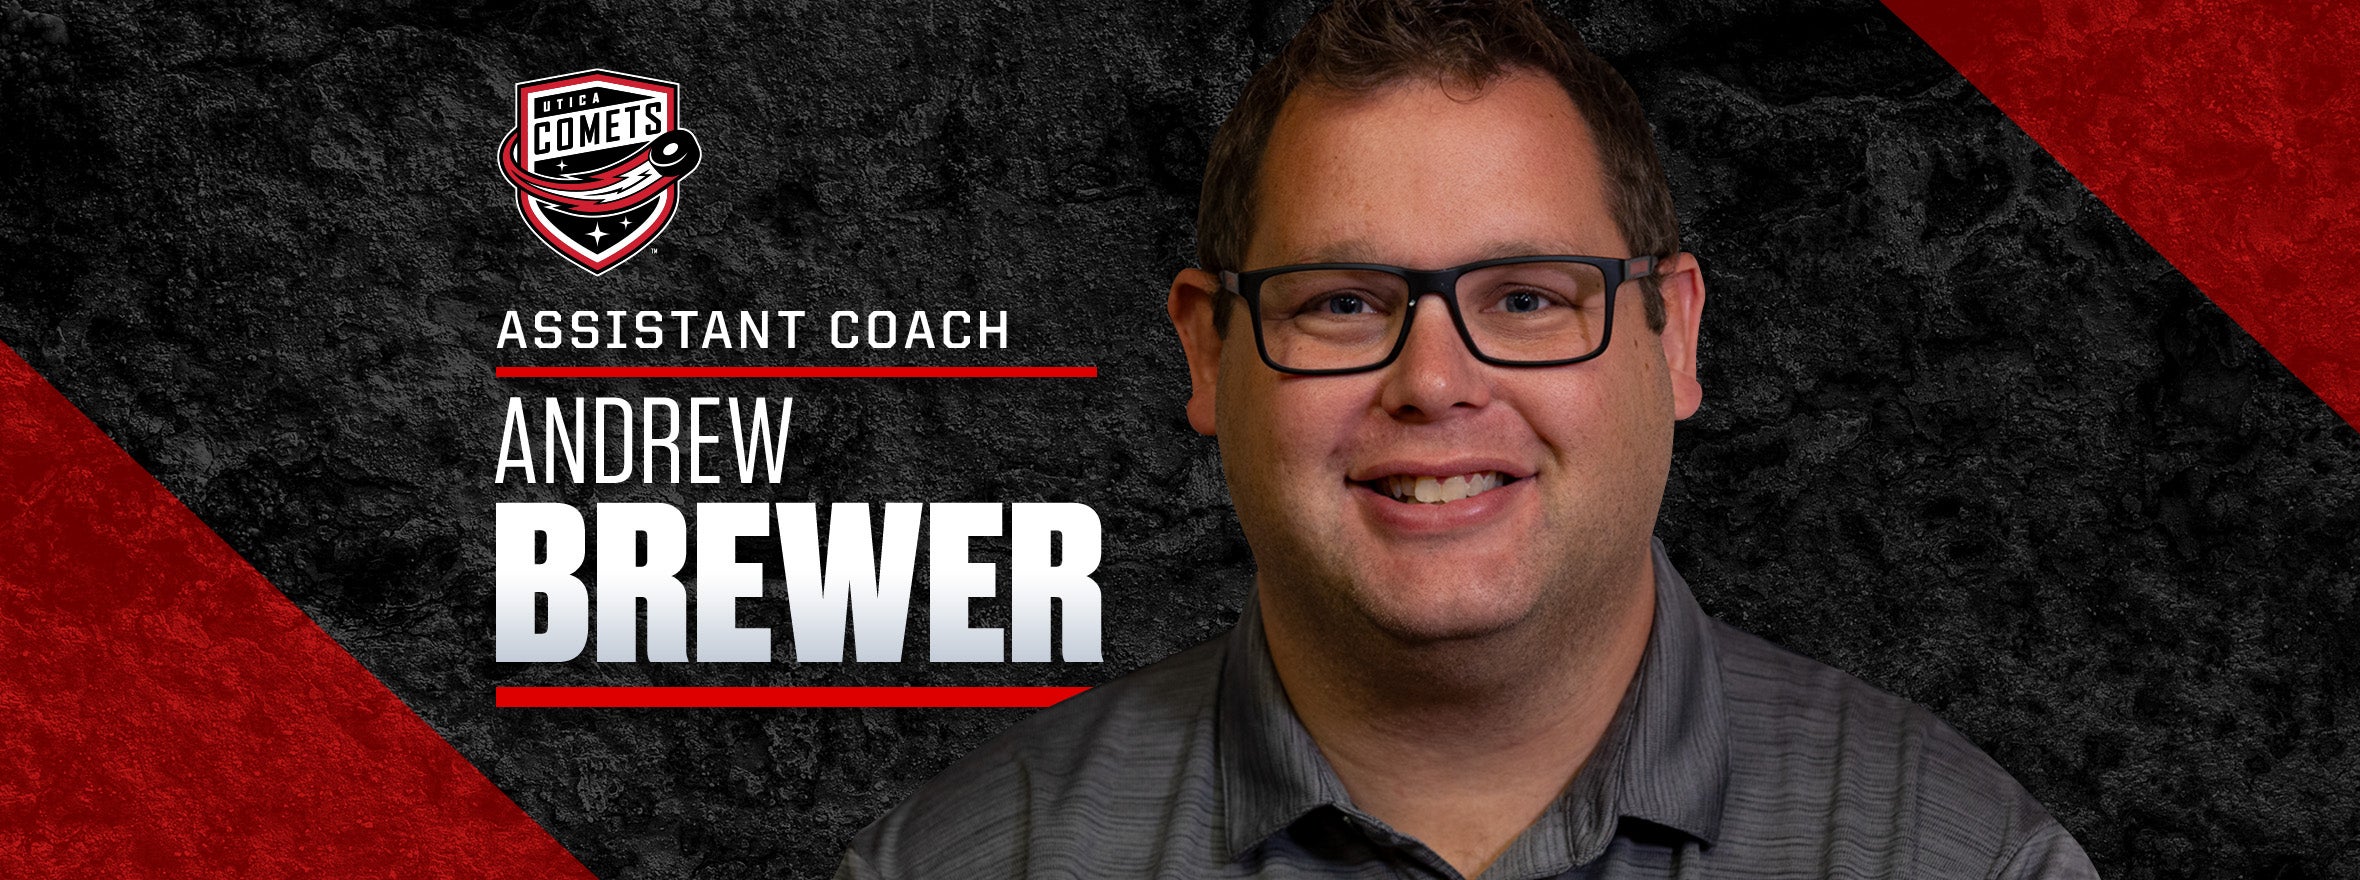 ANDREW BREWER NAMED COMETS ASSISTANT COACH